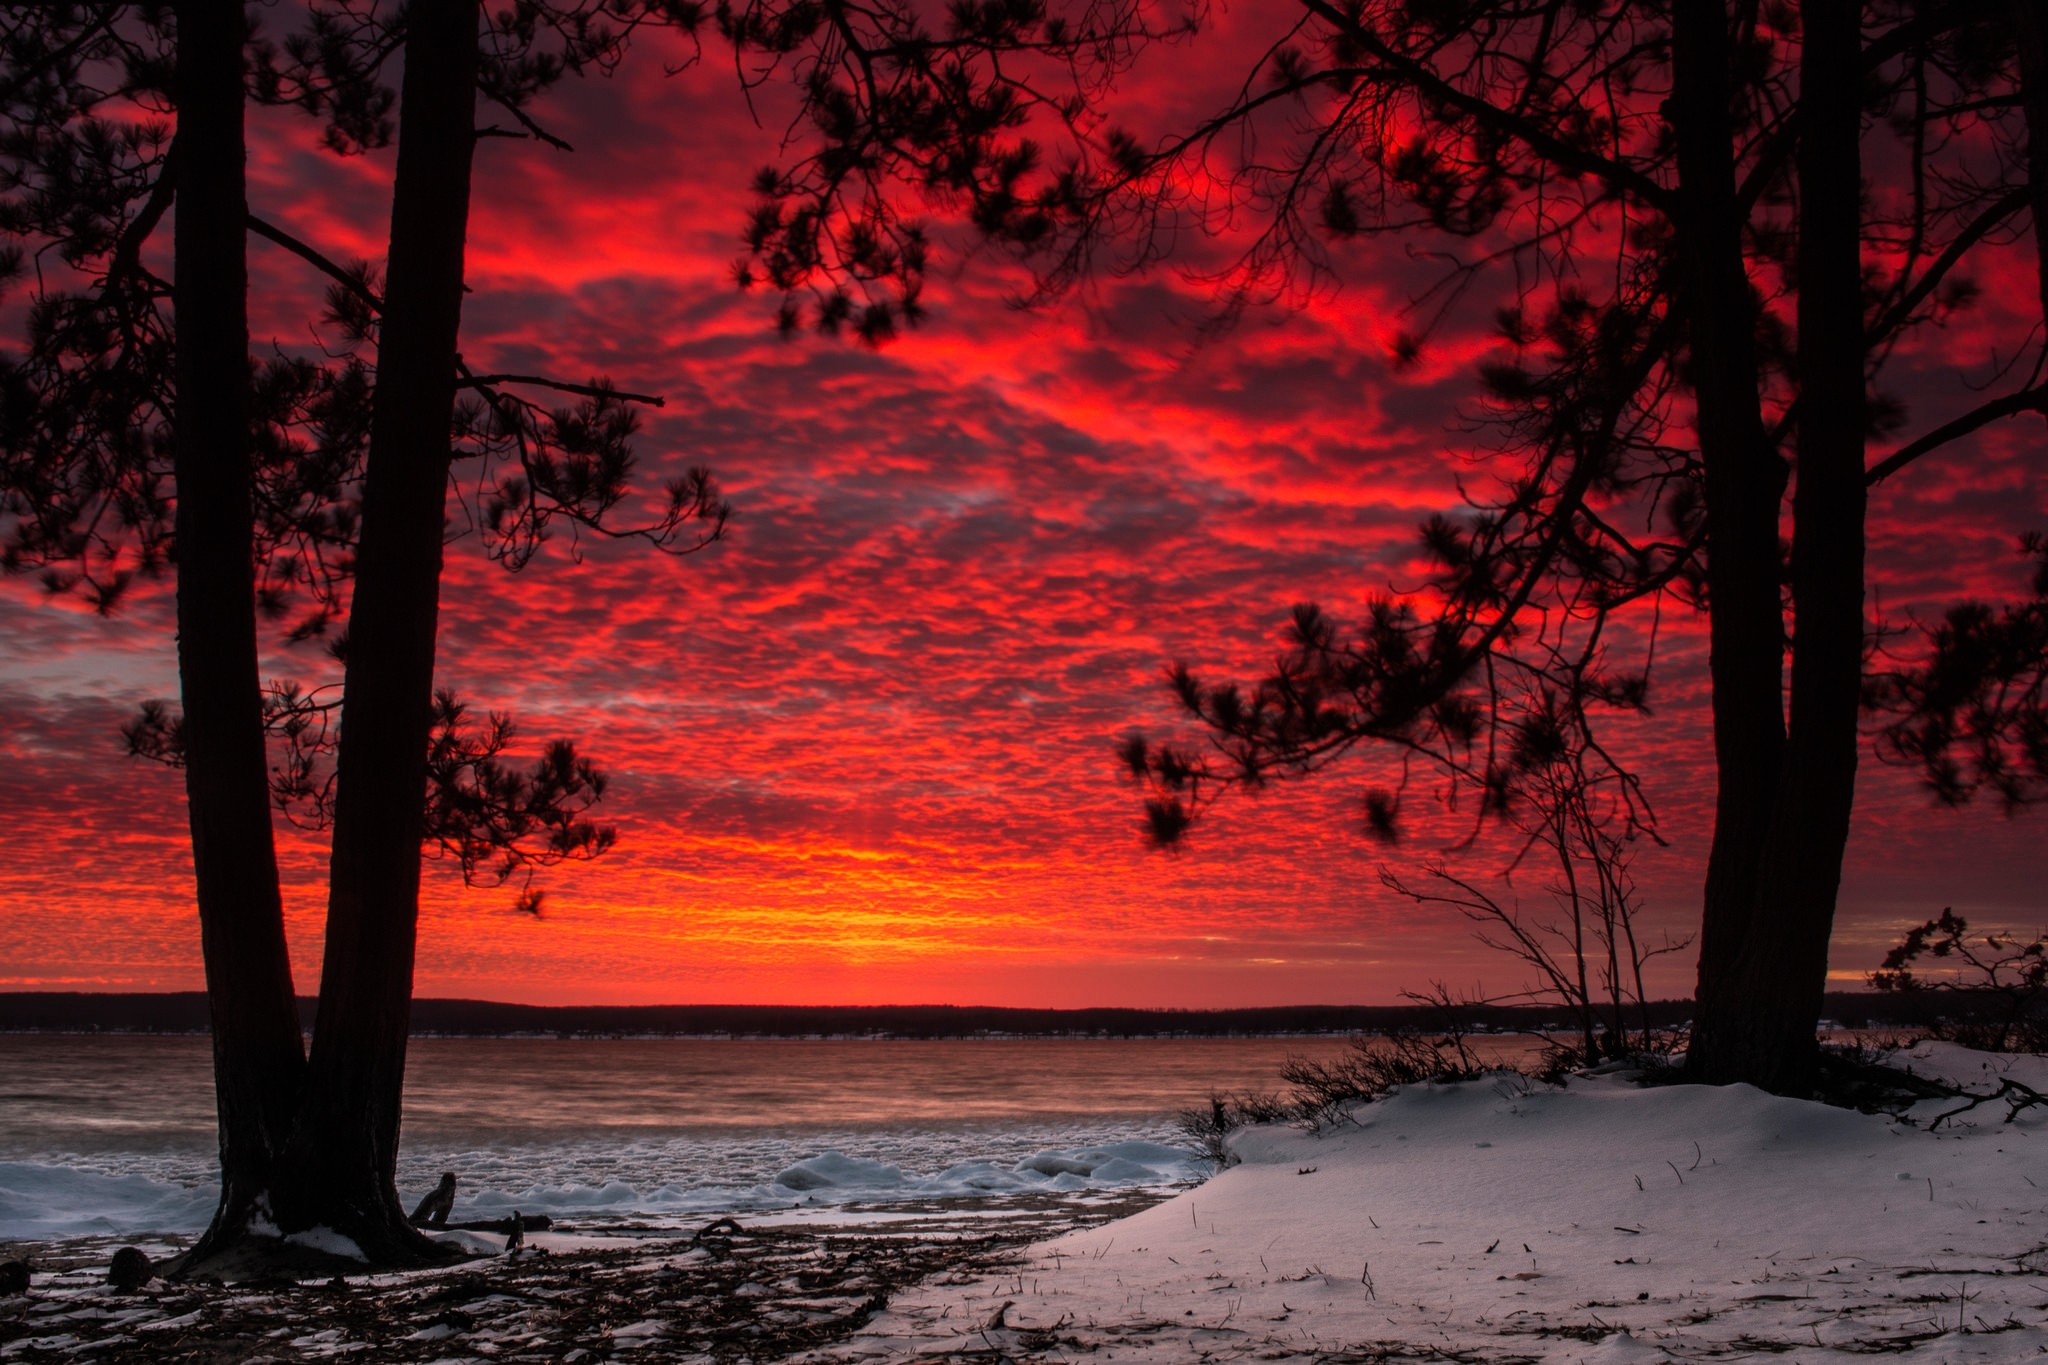 General 2048x1365 landscape snow sunset red clouds nature sky sunlight winter low light water